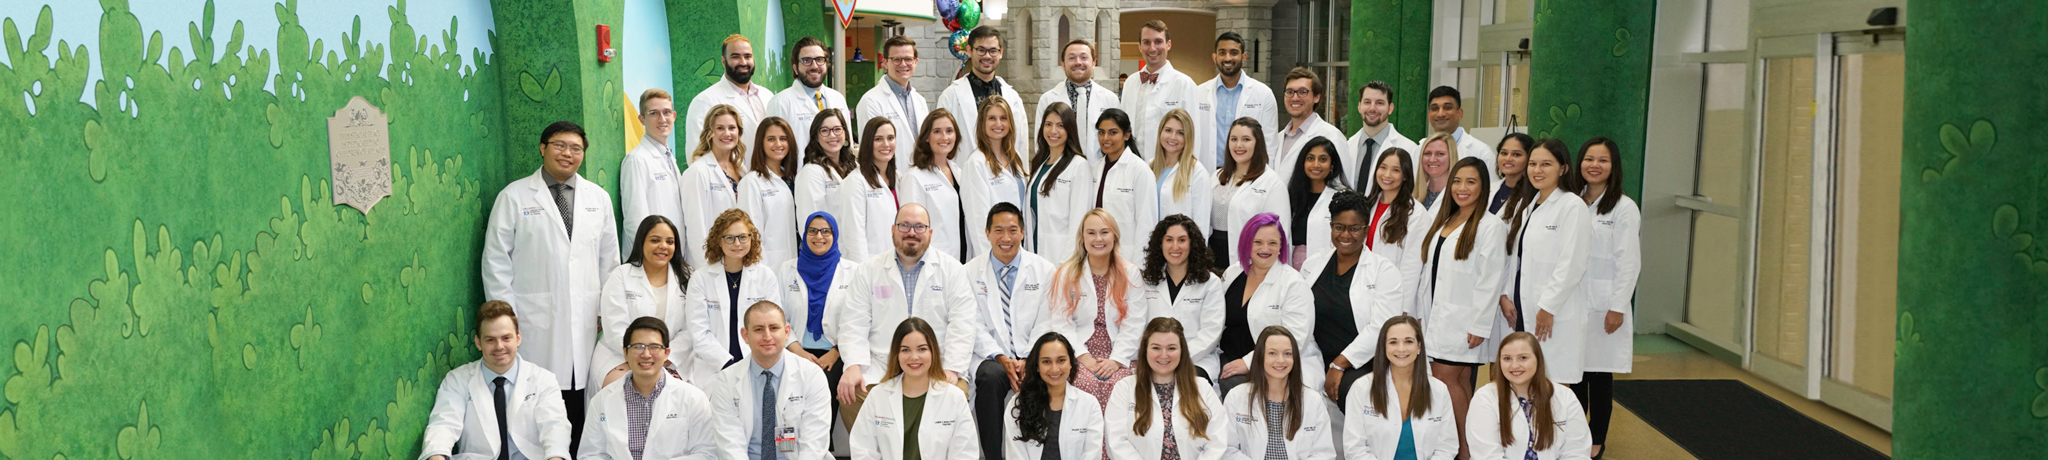 Pediatric Res Group picture main